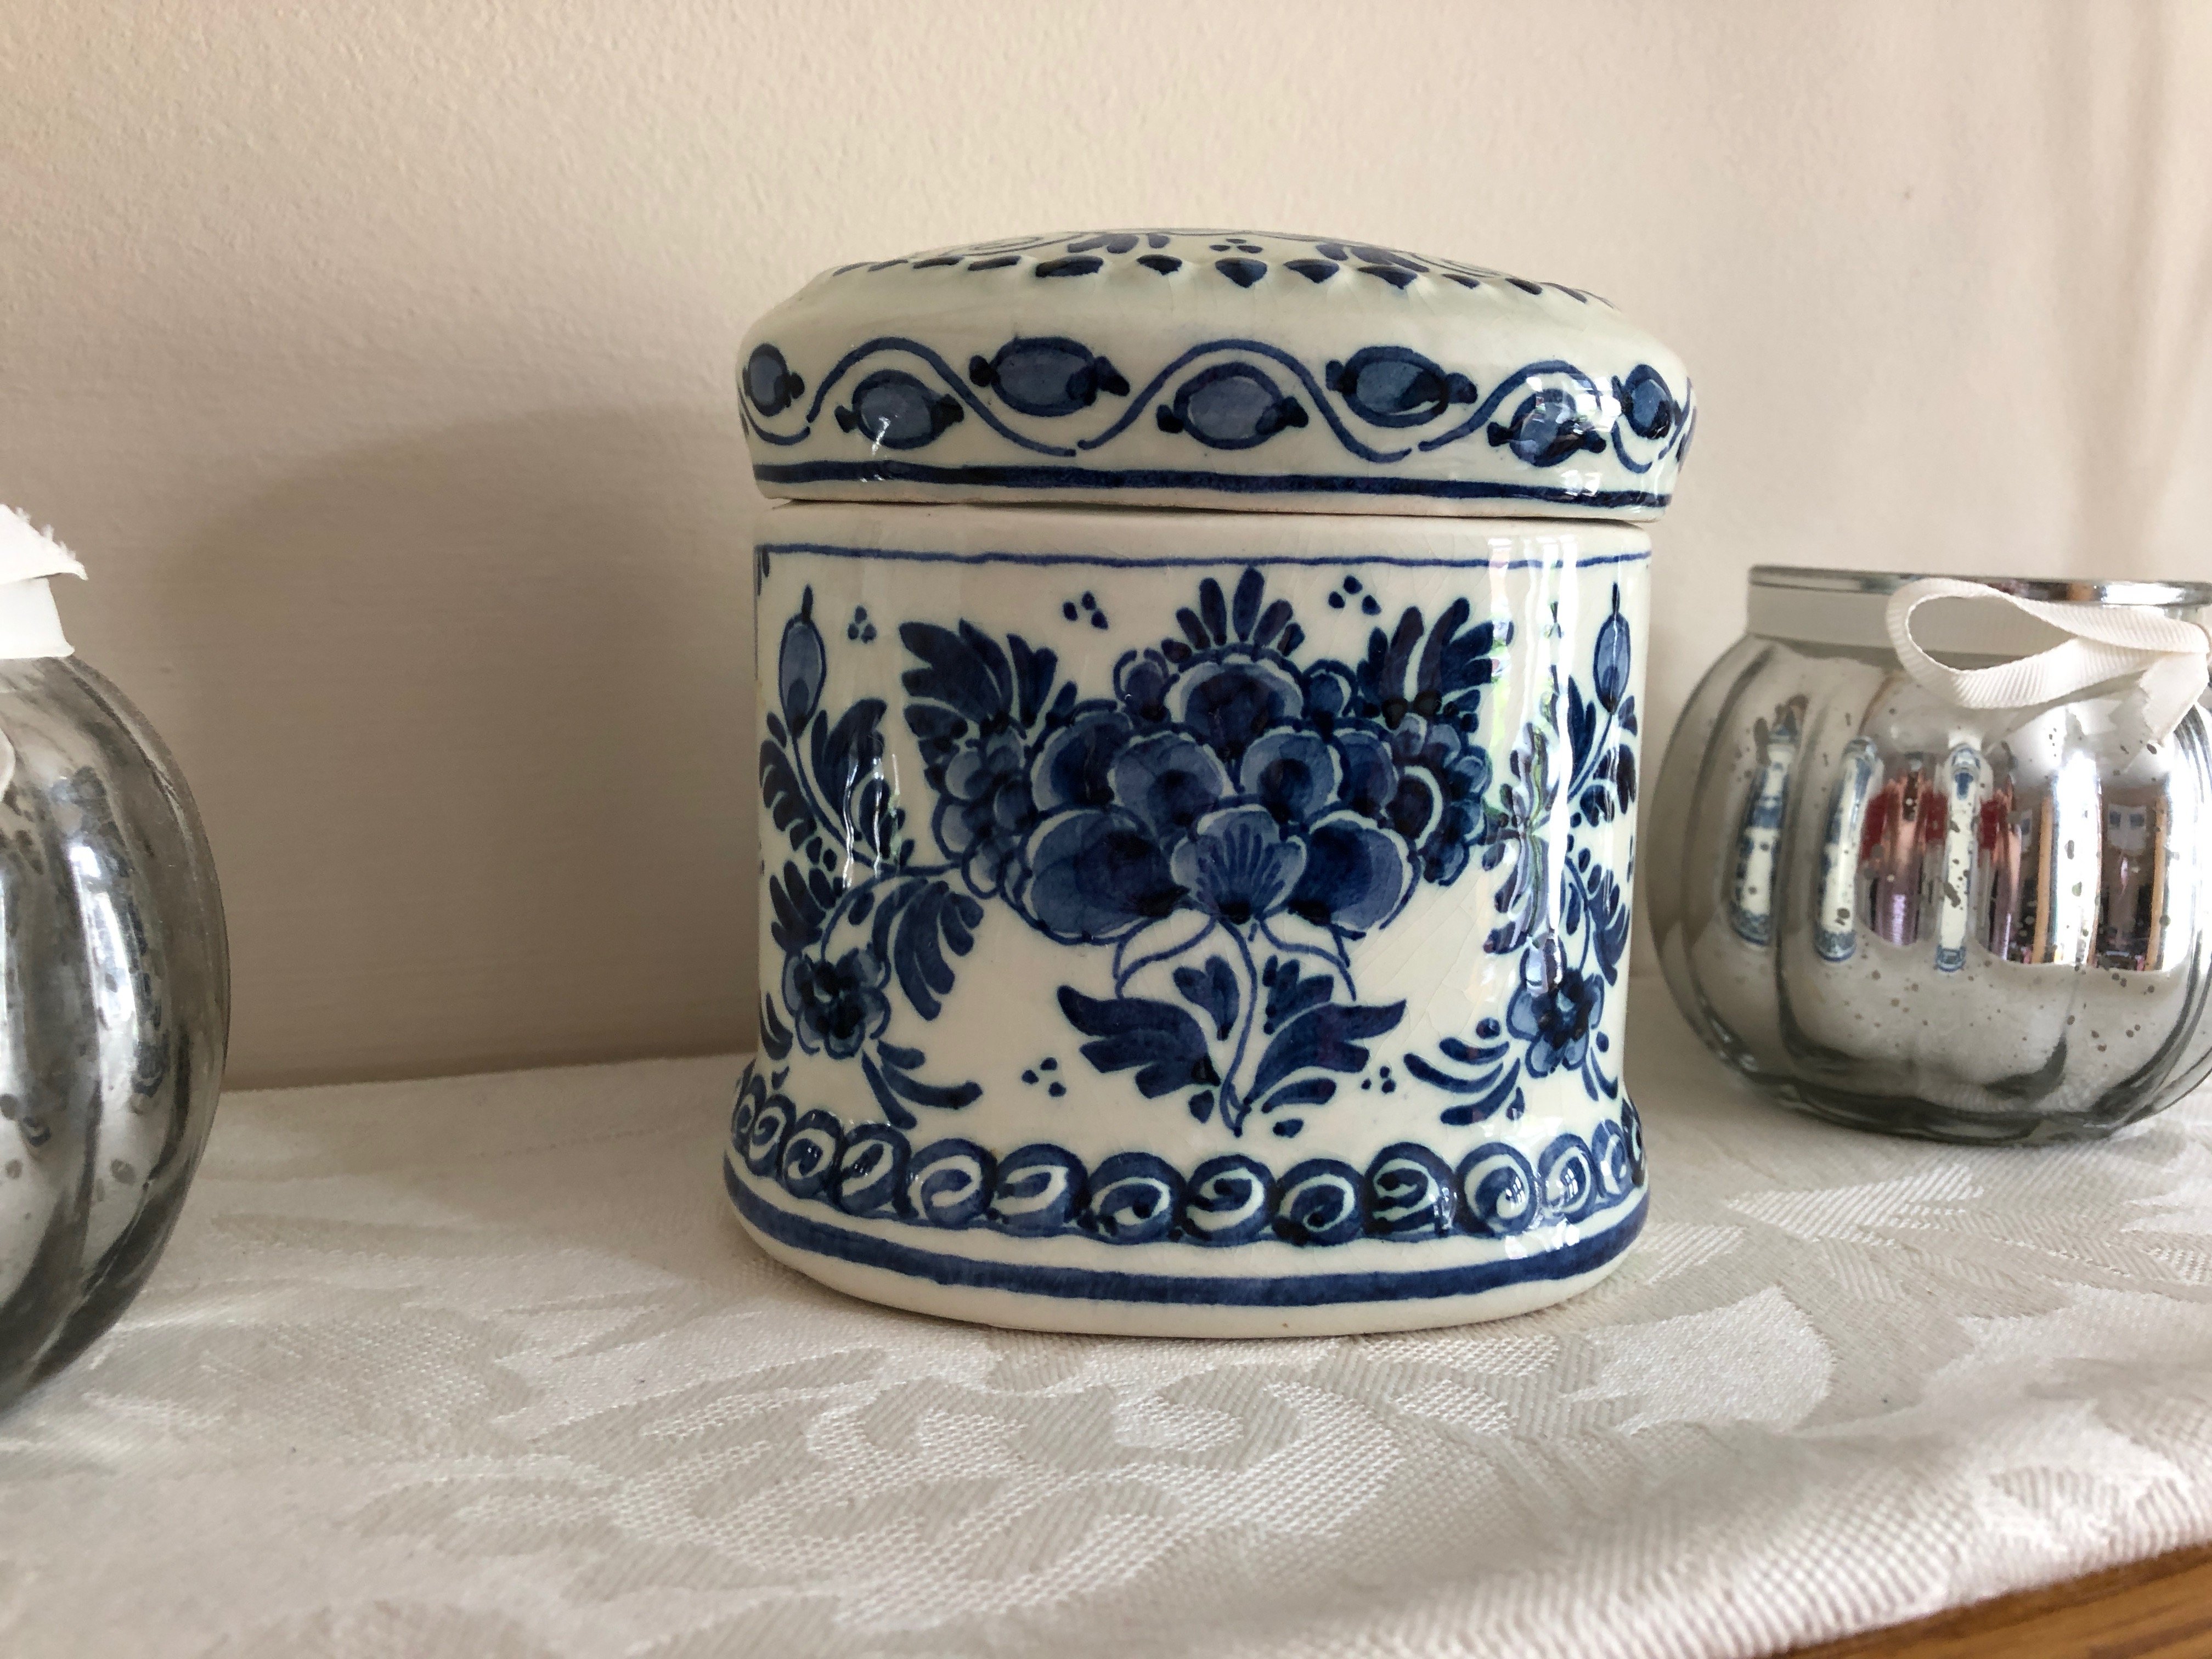 A wonderful little blue and white ceramic trinket box I picked up at a car boot sale. I love the colours and pattern. I think it could be inspiration to me for a new creation.